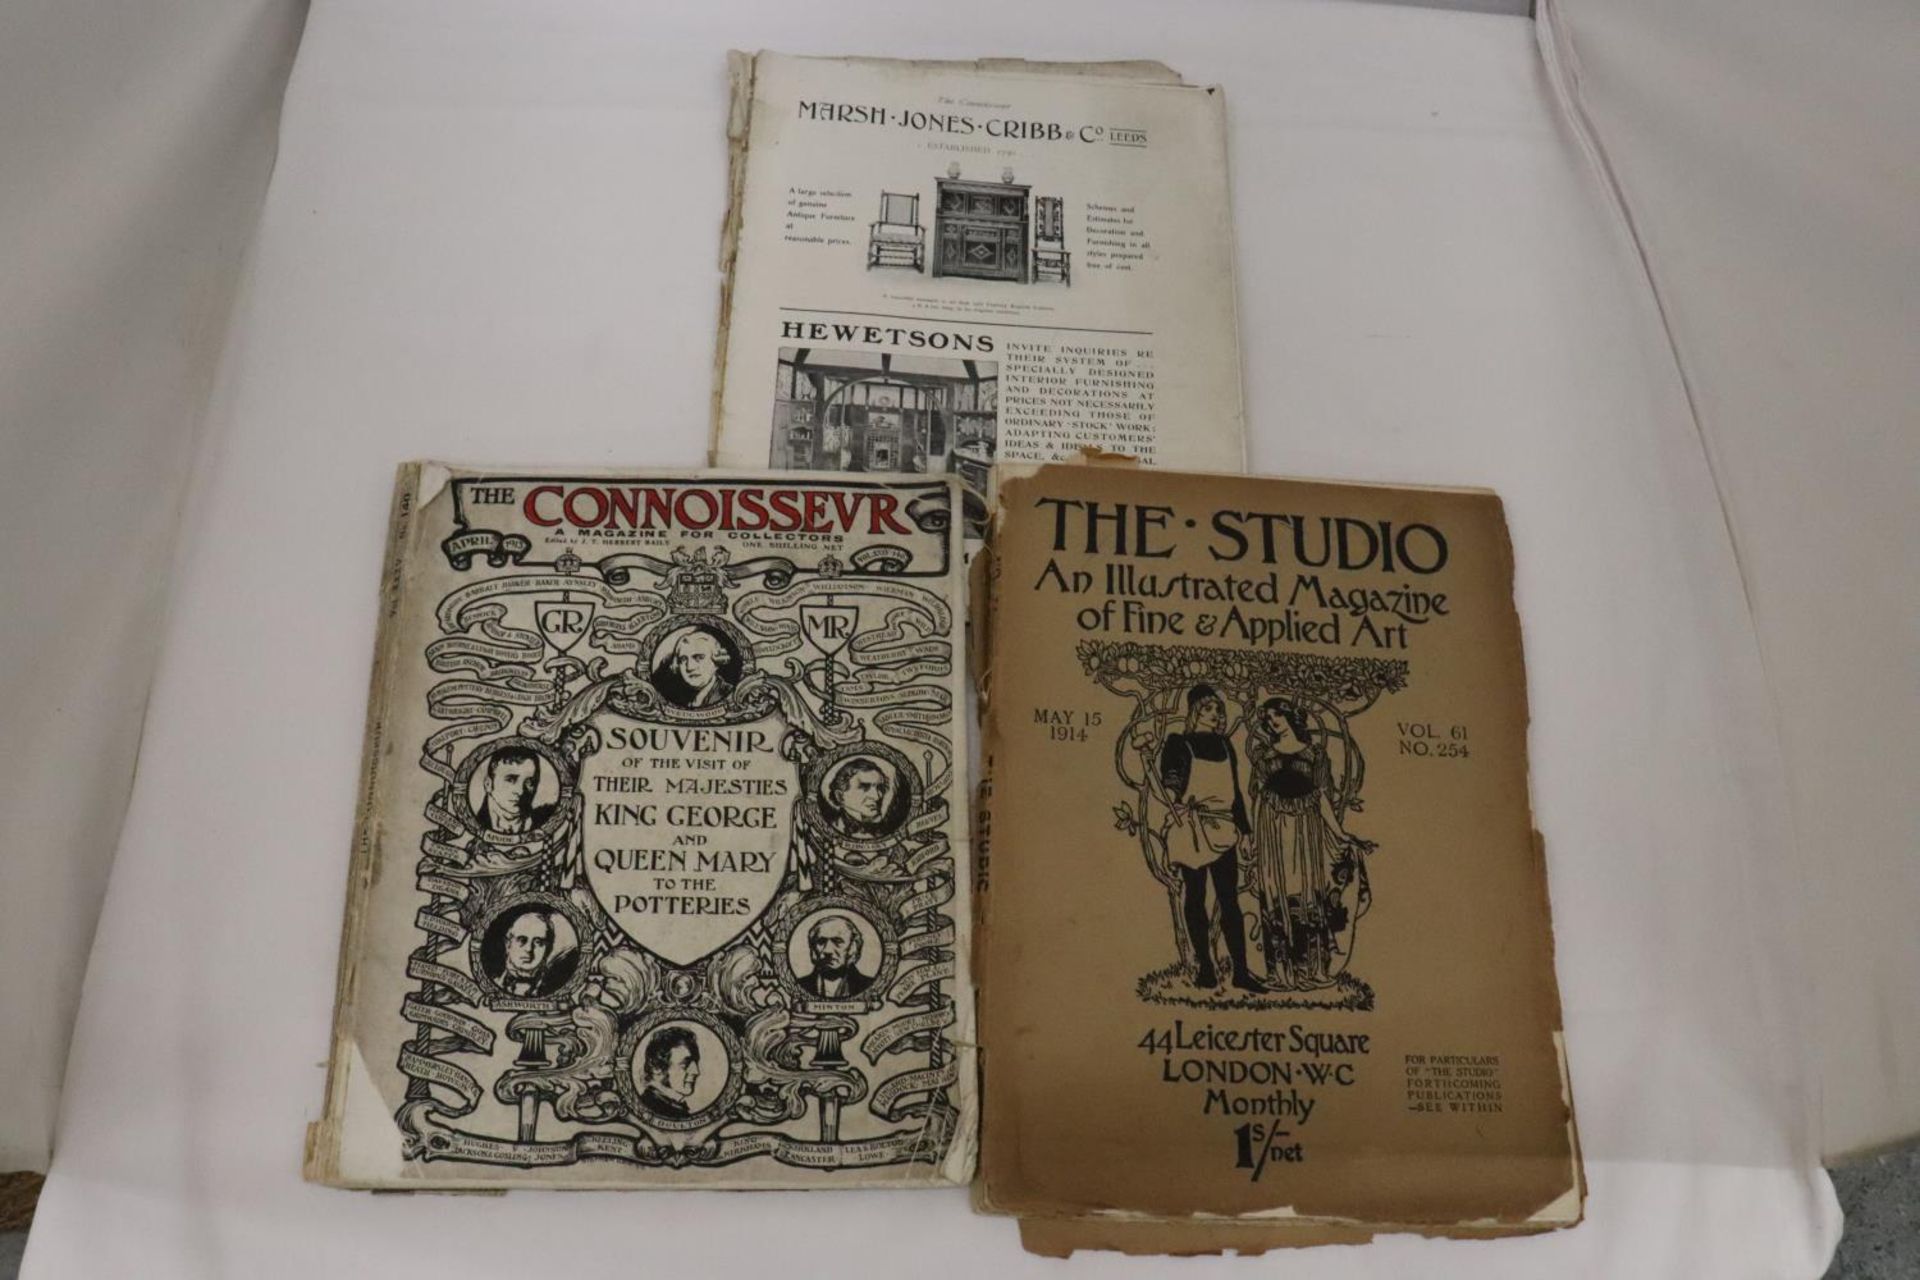 THREE VINTAGE MAGAZINES TO INCLUDE TWO COPIES OF 'THE CONNOISSEUR', ONE BEING A SOUVENIR OF KING - Image 3 of 6